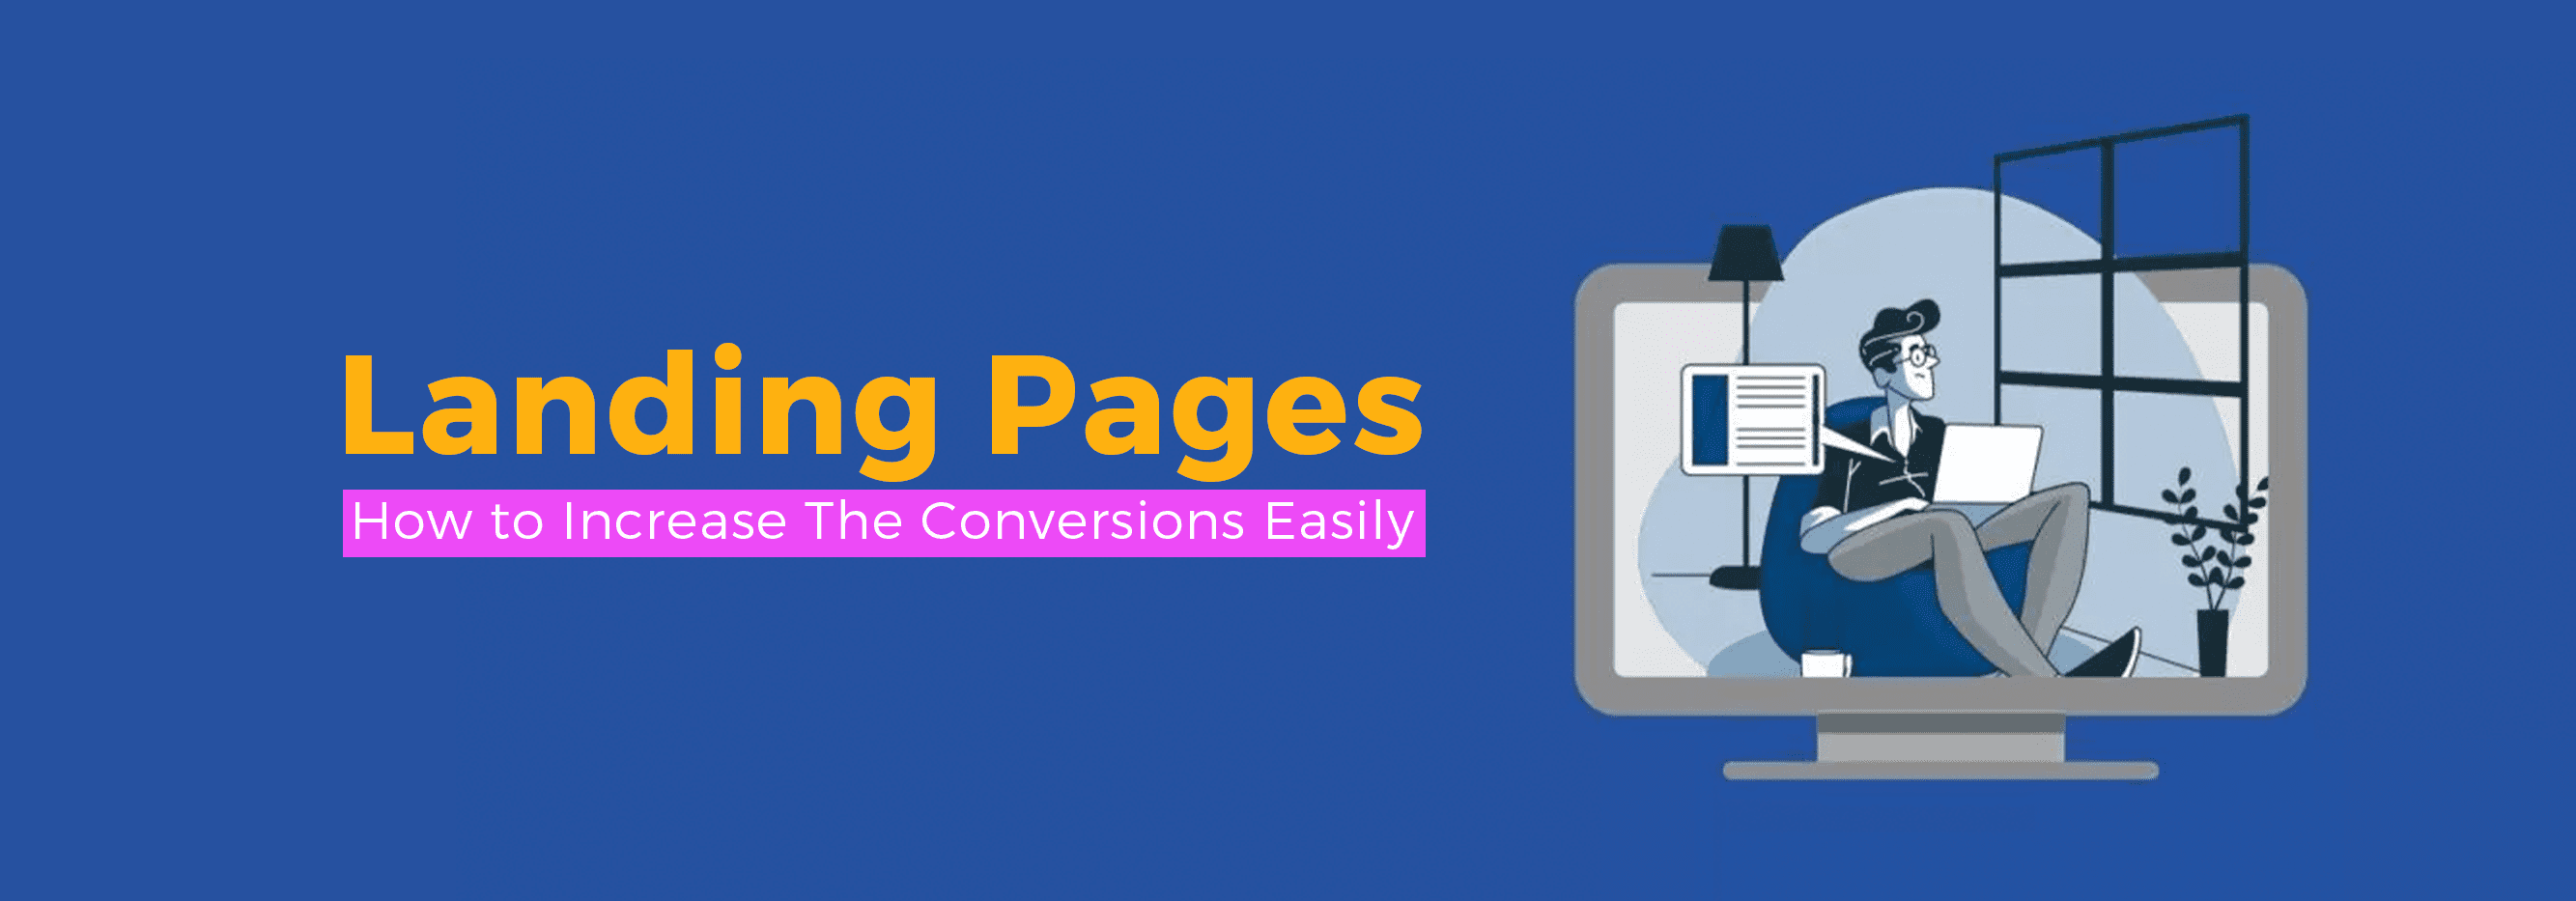 Landing Pages – How to Increase The Conversions Easily_banner